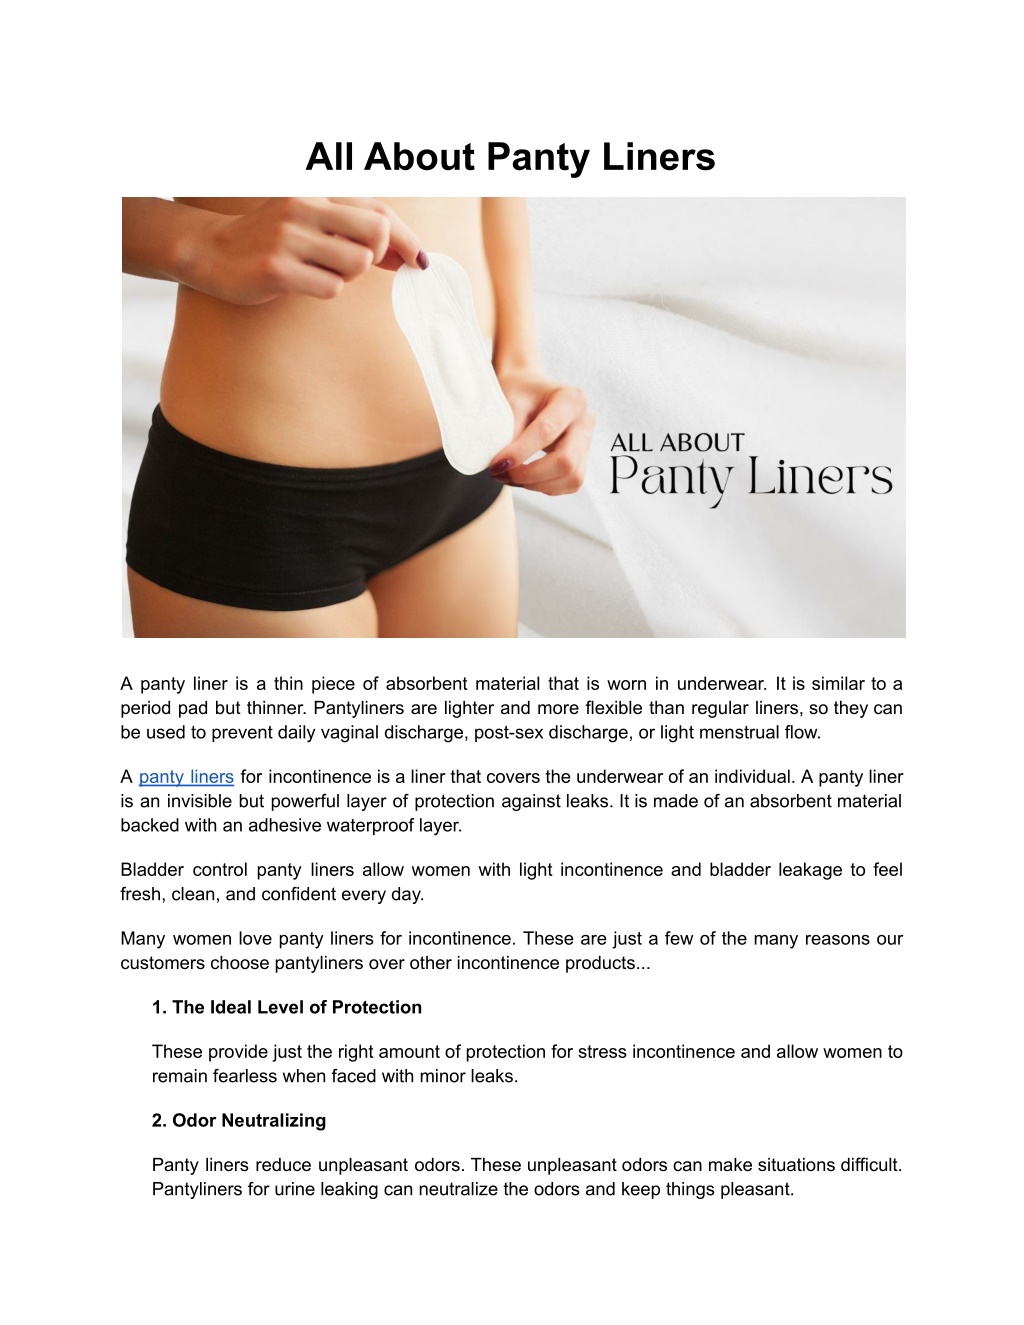 PPT - All About Panty Liners PowerPoint Presentation, free download -  ID:11363653